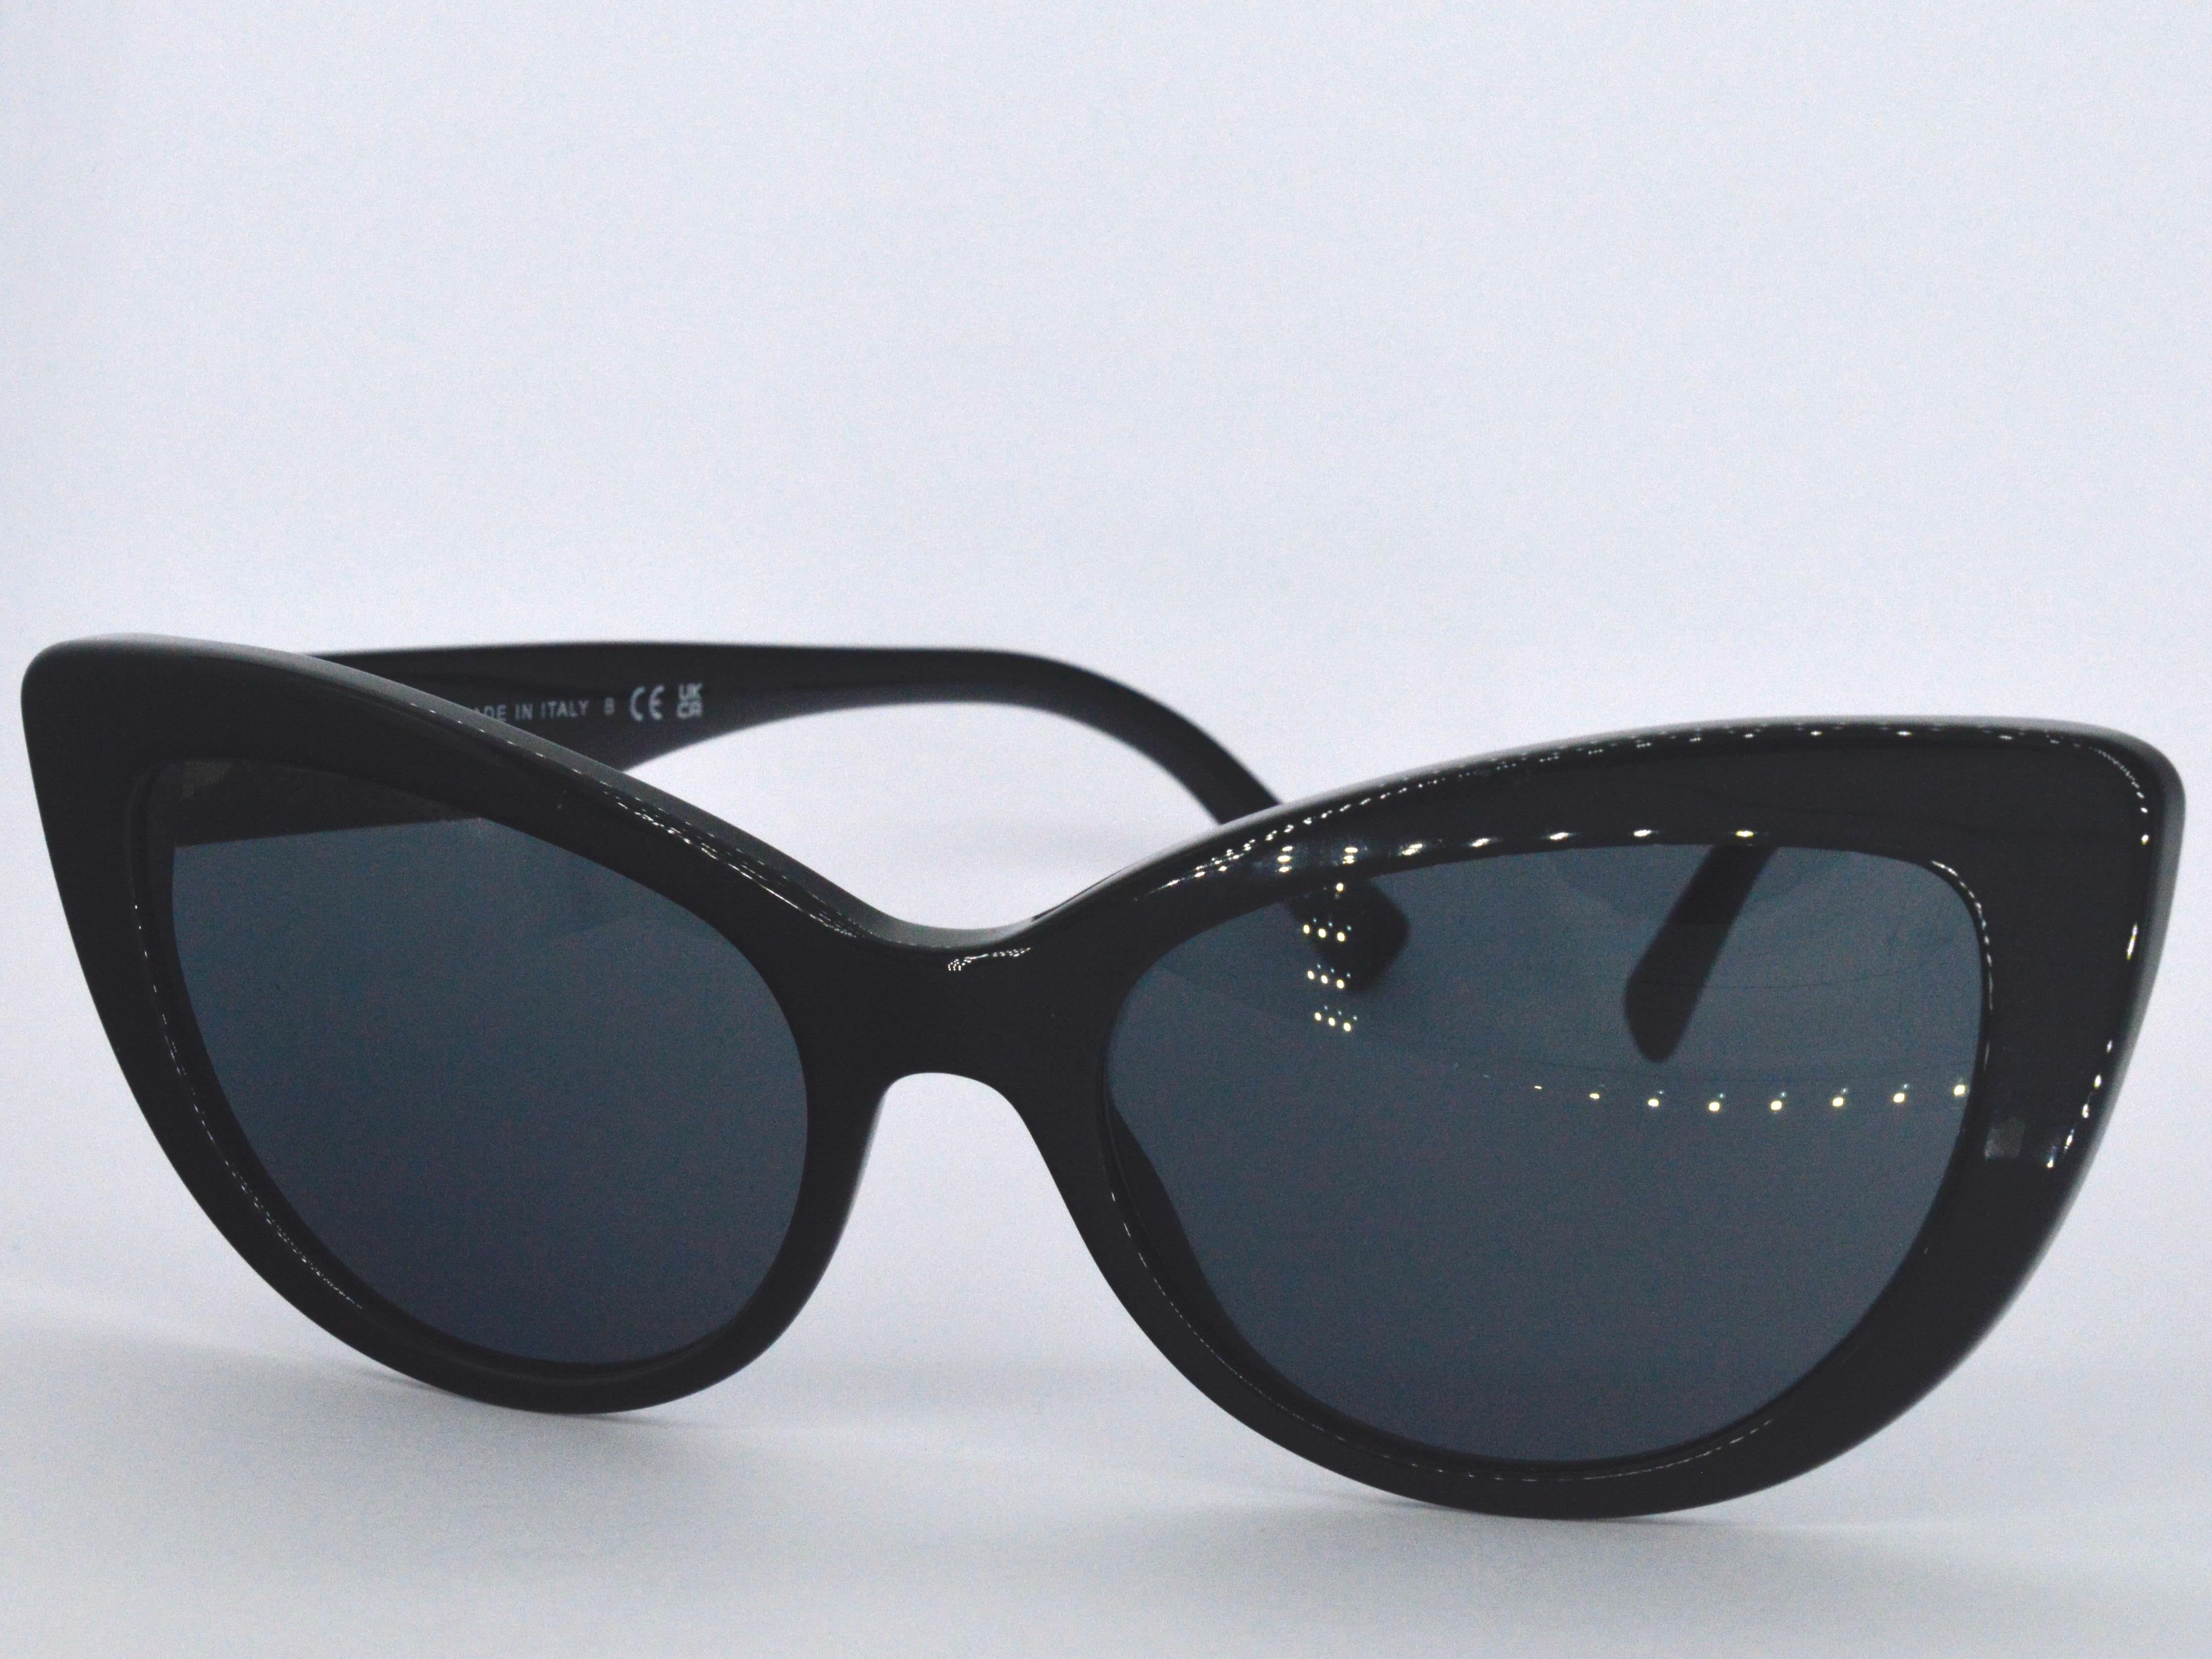 Model 4388 in sleek black, these Versace sunglasses are both stylish and versatile. They come with proof of purchase, the original box, and a warranty certificate for added assurance. Perfect for those who value fashion and authenticity, these